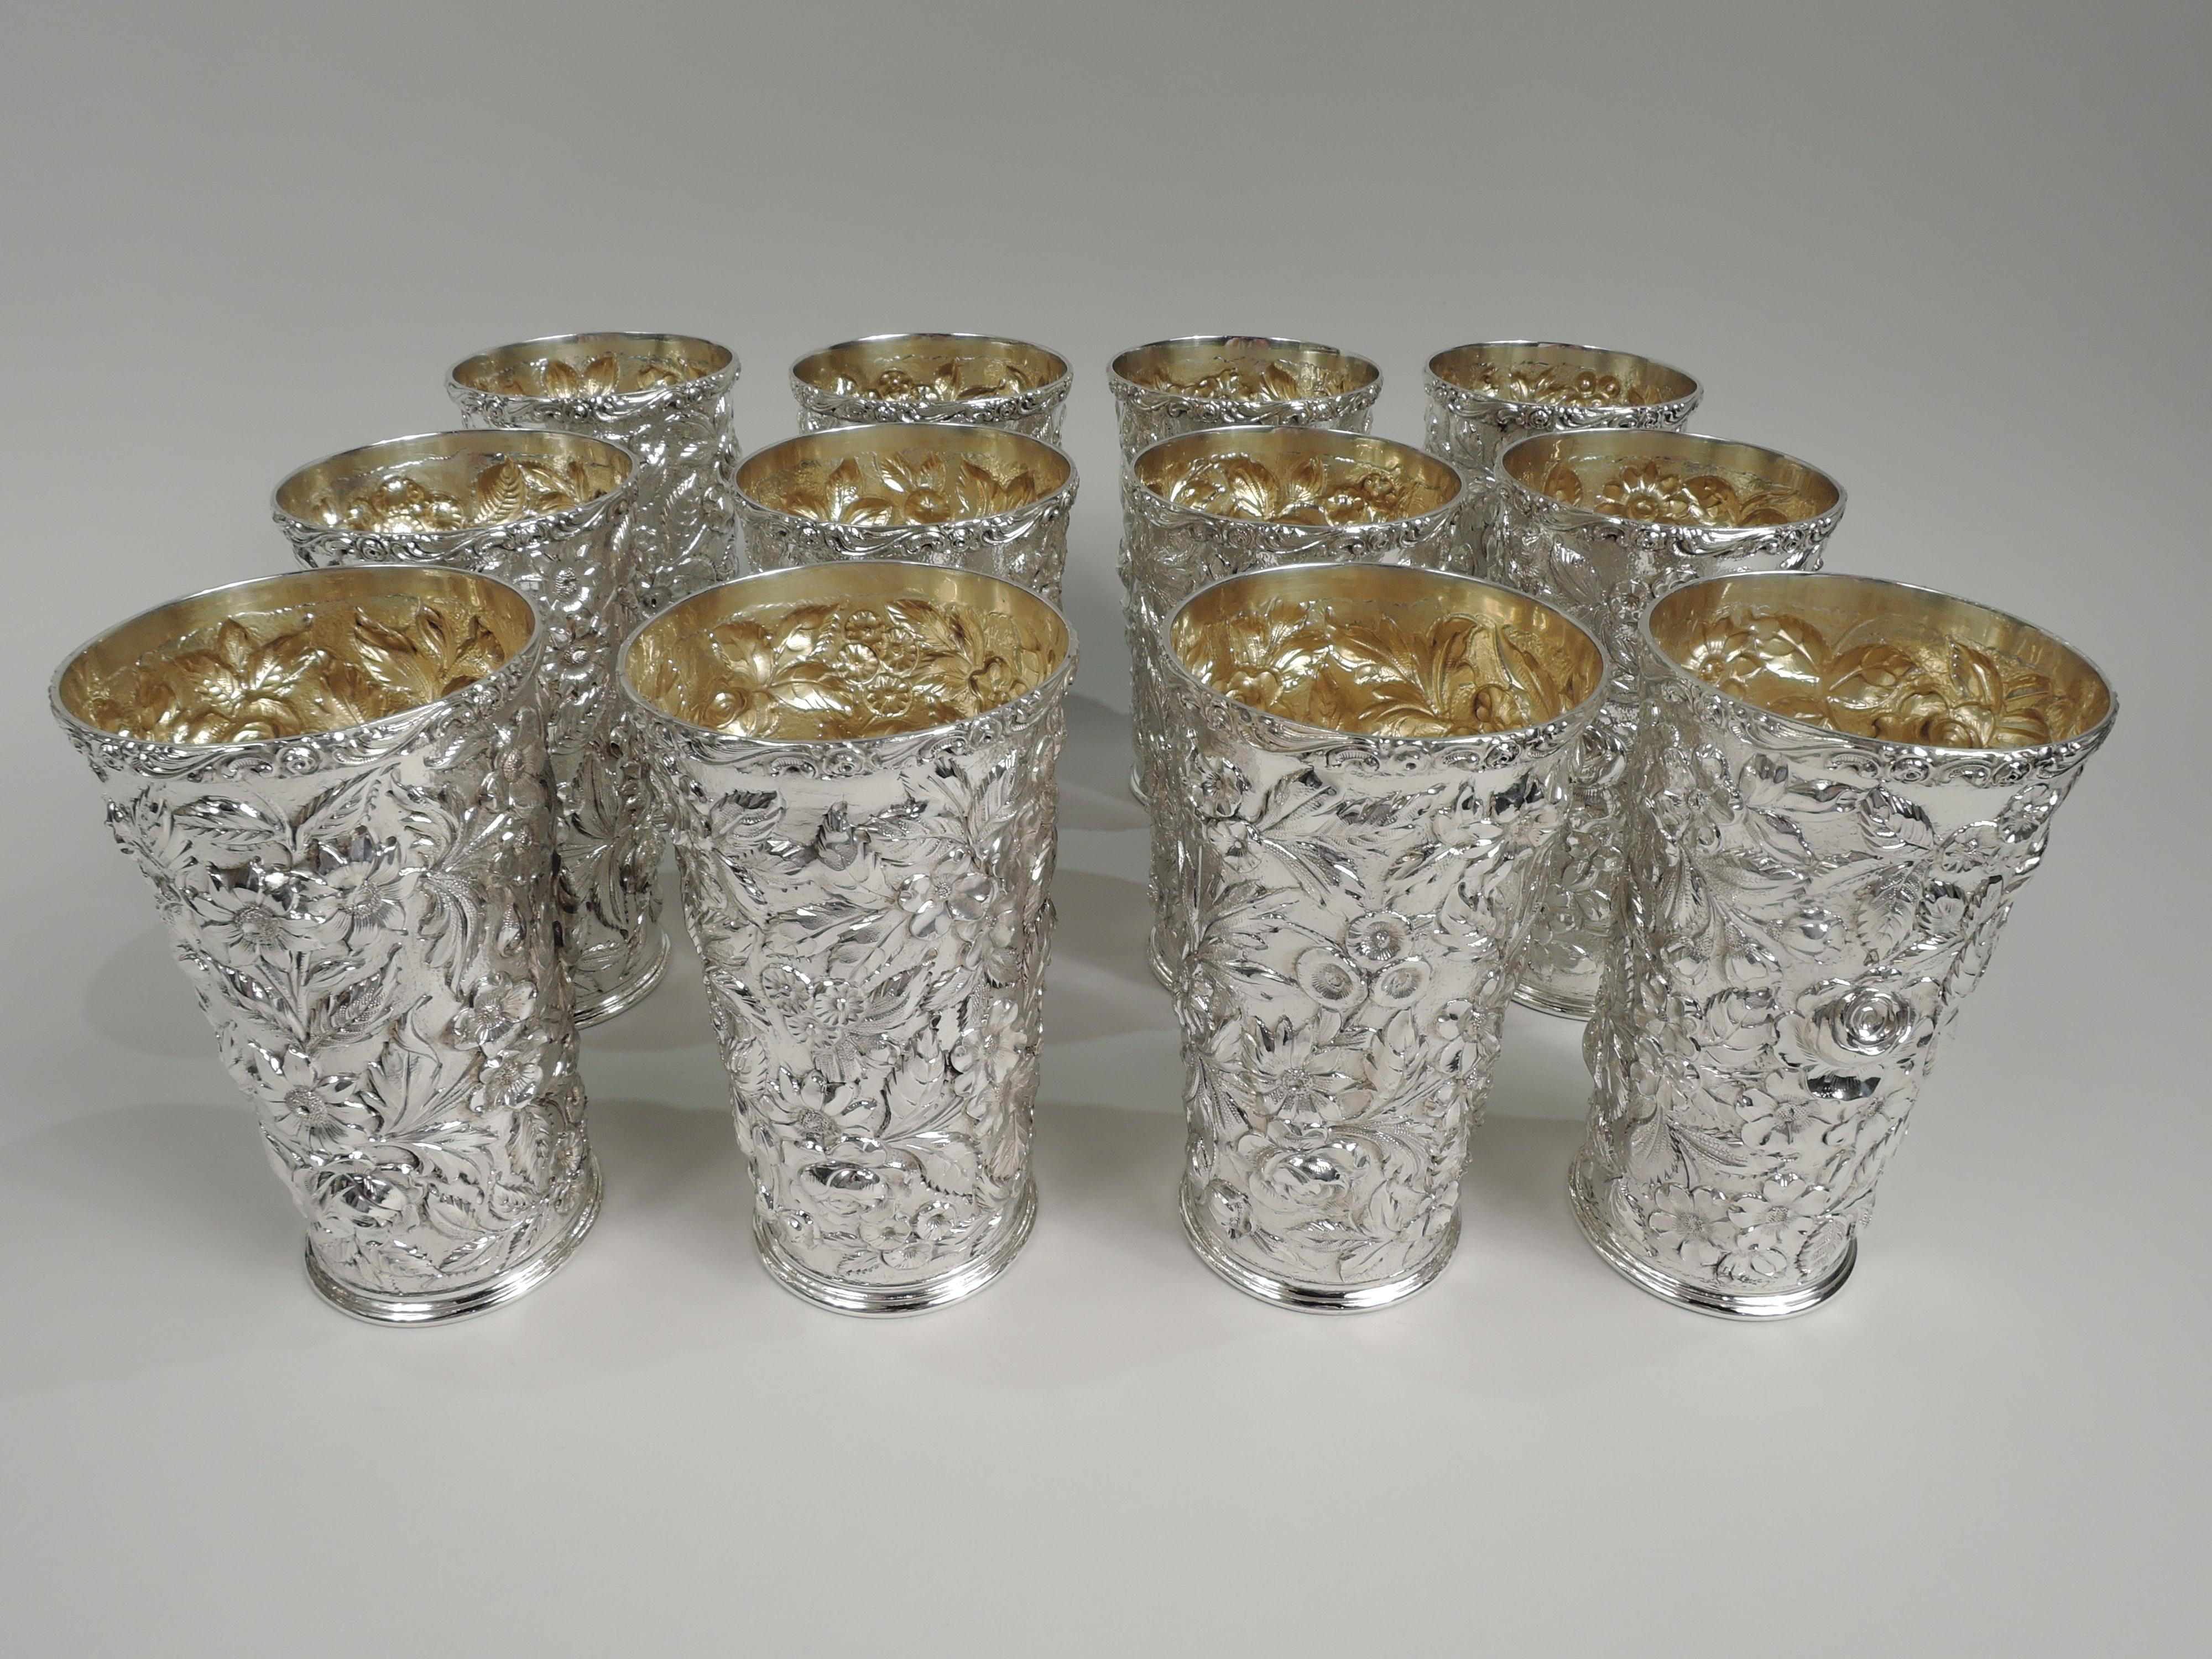 Set of 12 Edwardian sterling silver highballs. Made by Heer-Schofield Co. in Baltimore, ca 1910. Each: Straight and tapering sides with floral repousse. Applied tooled scrolled rim and plain and stepped foot. Gilt washed interior. Pretty and tactile